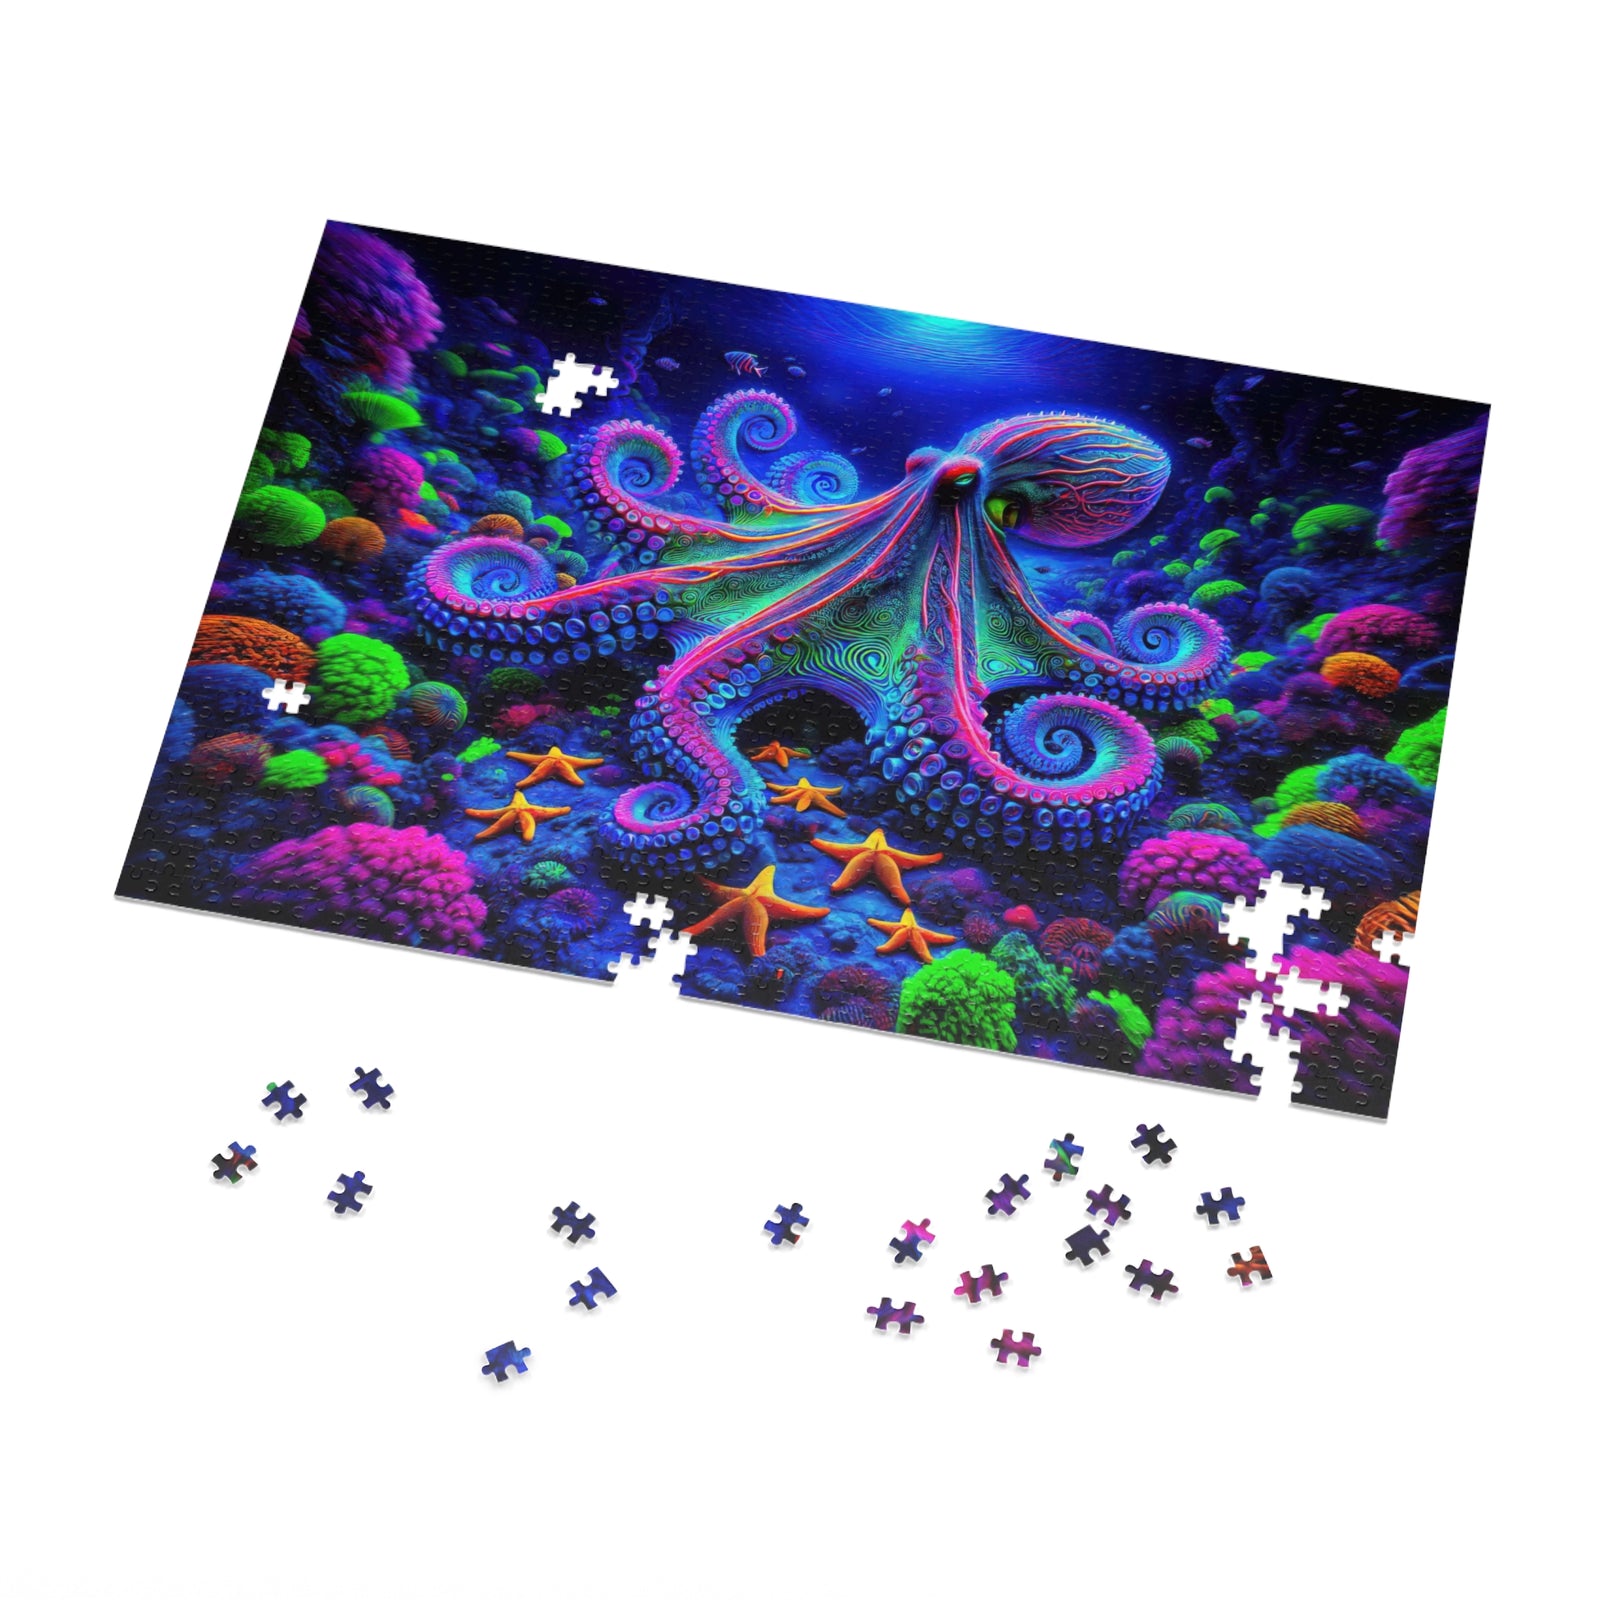 The Technicolor Depths of an Octopus Jigsaw Puzzle